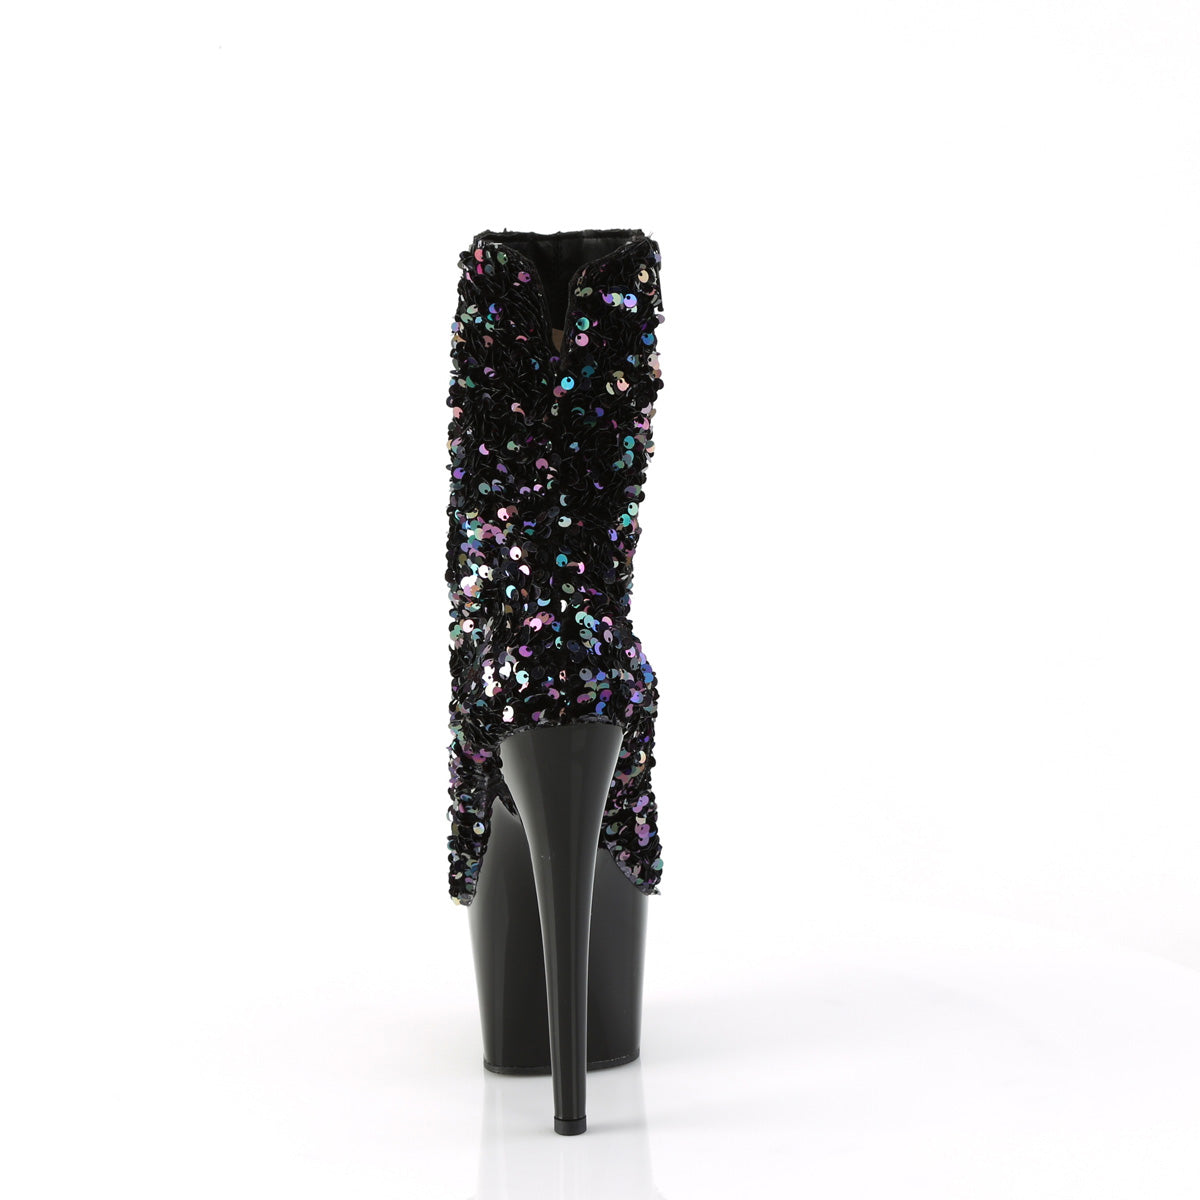 ADORE-1042SQ - Black Multi Sequins Ankle Boots